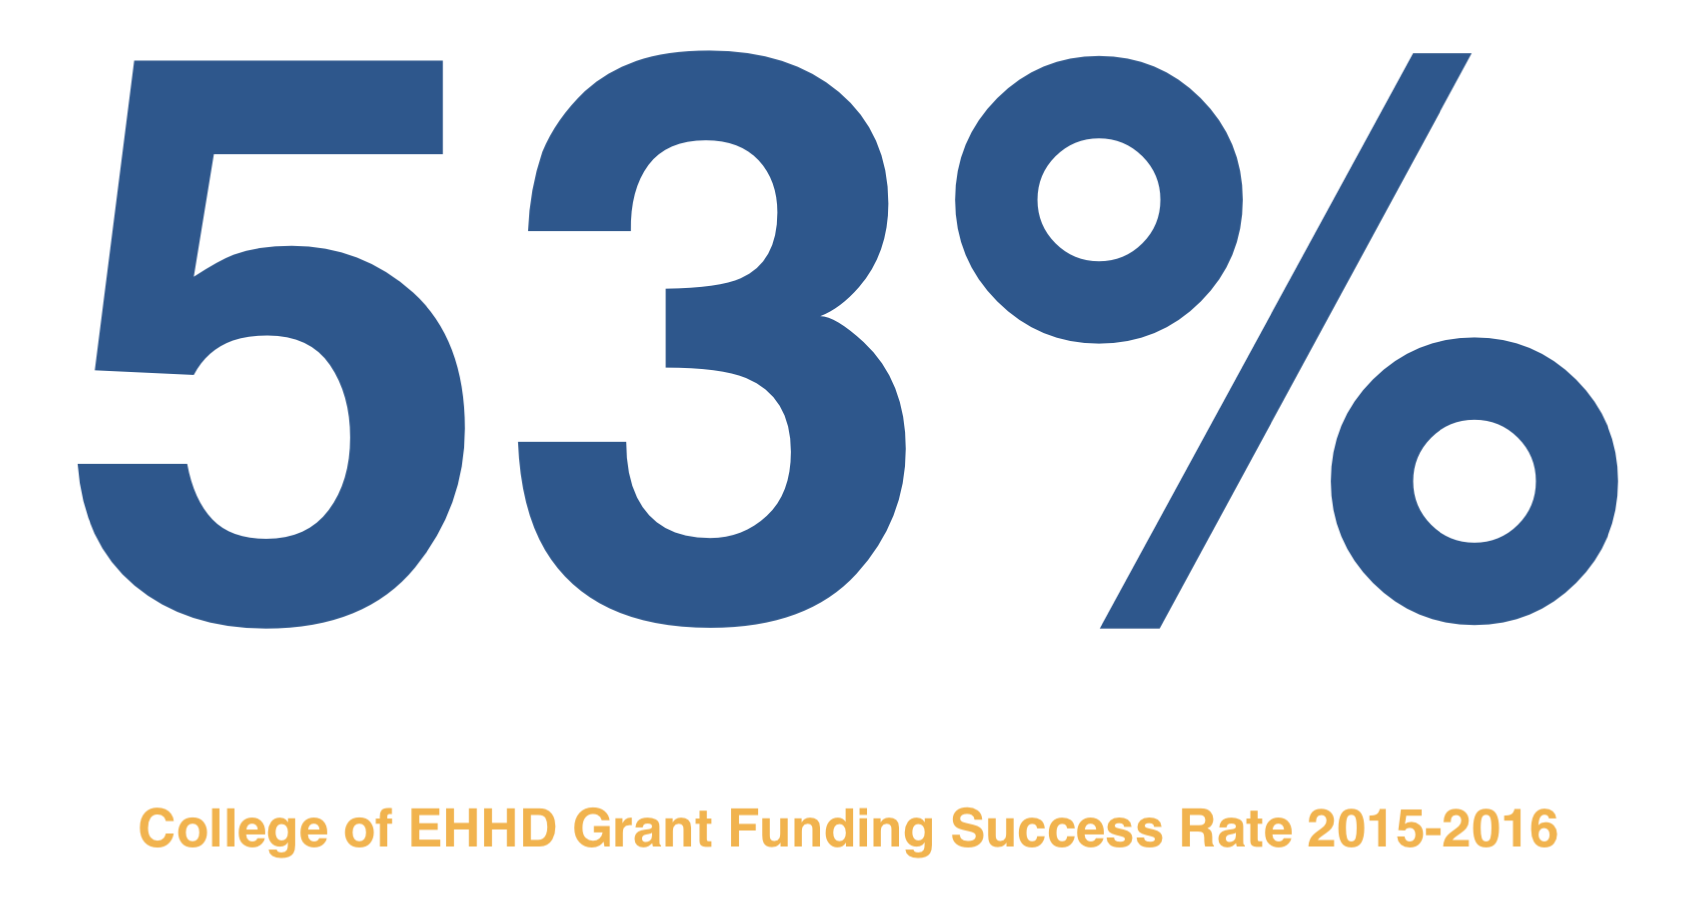 EHHD Grant Submission Success Rate 2015-2016